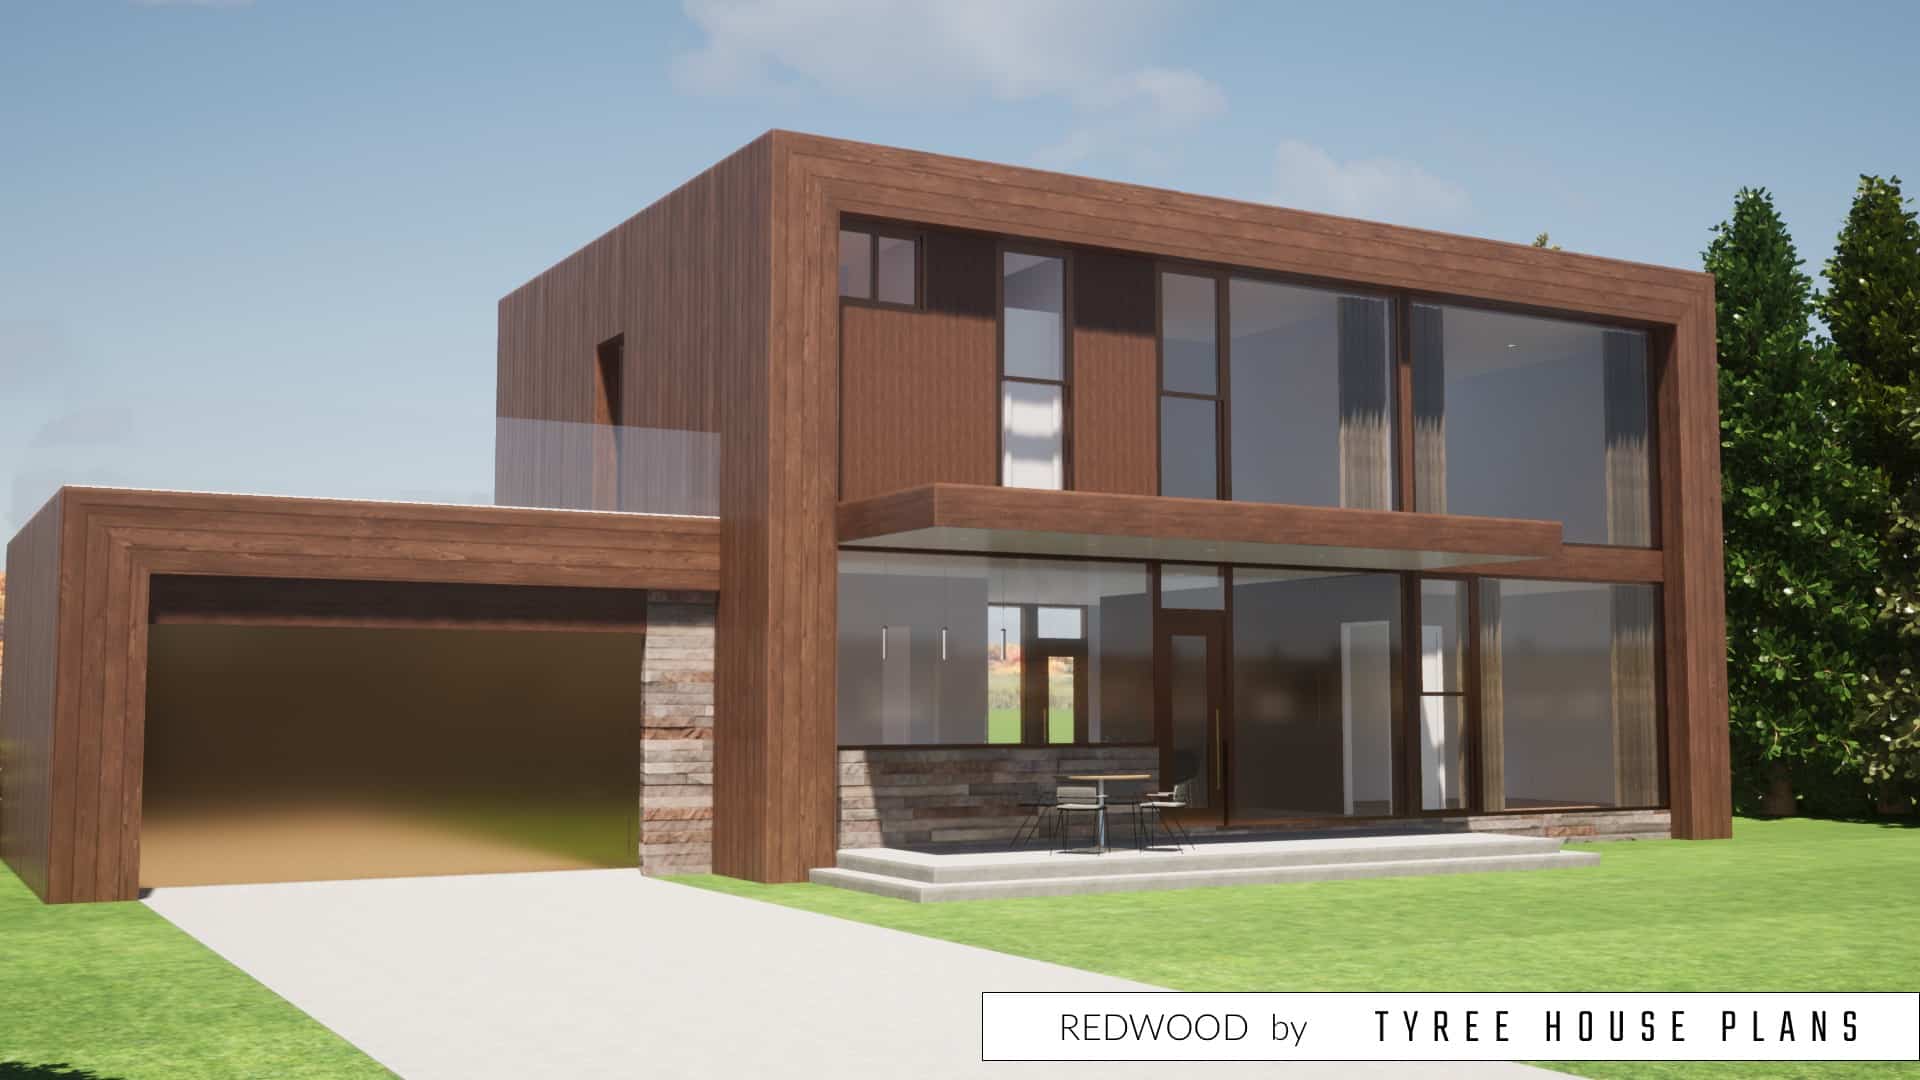 Redwood House Plan by Tyree House Plans